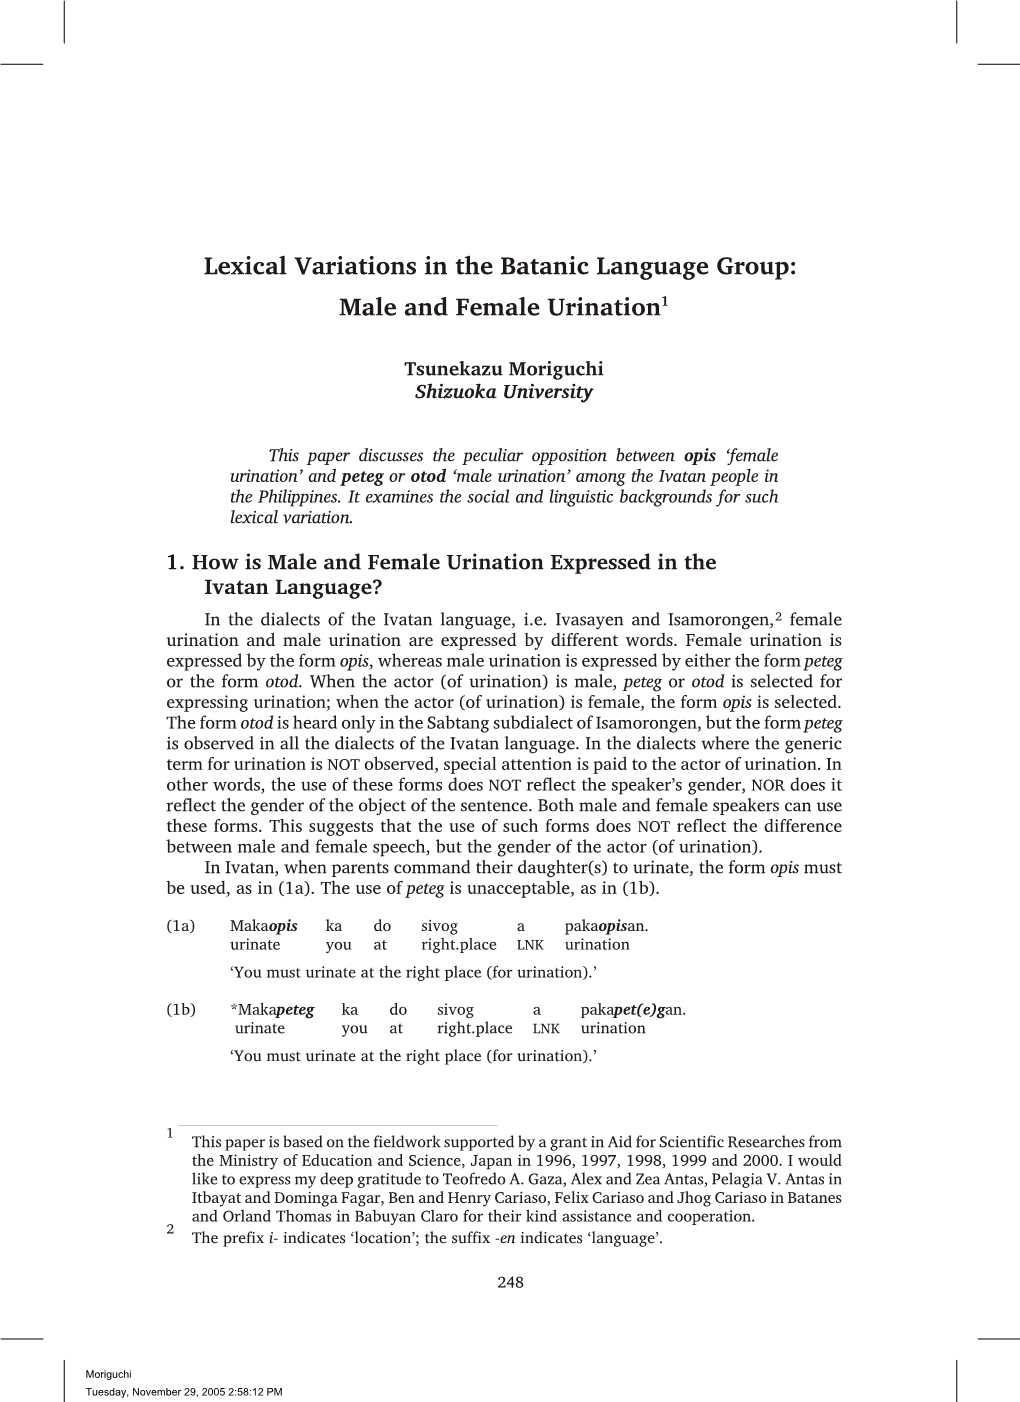 Lexical Variations in the Batanic Language Group: Male and Female Urination1